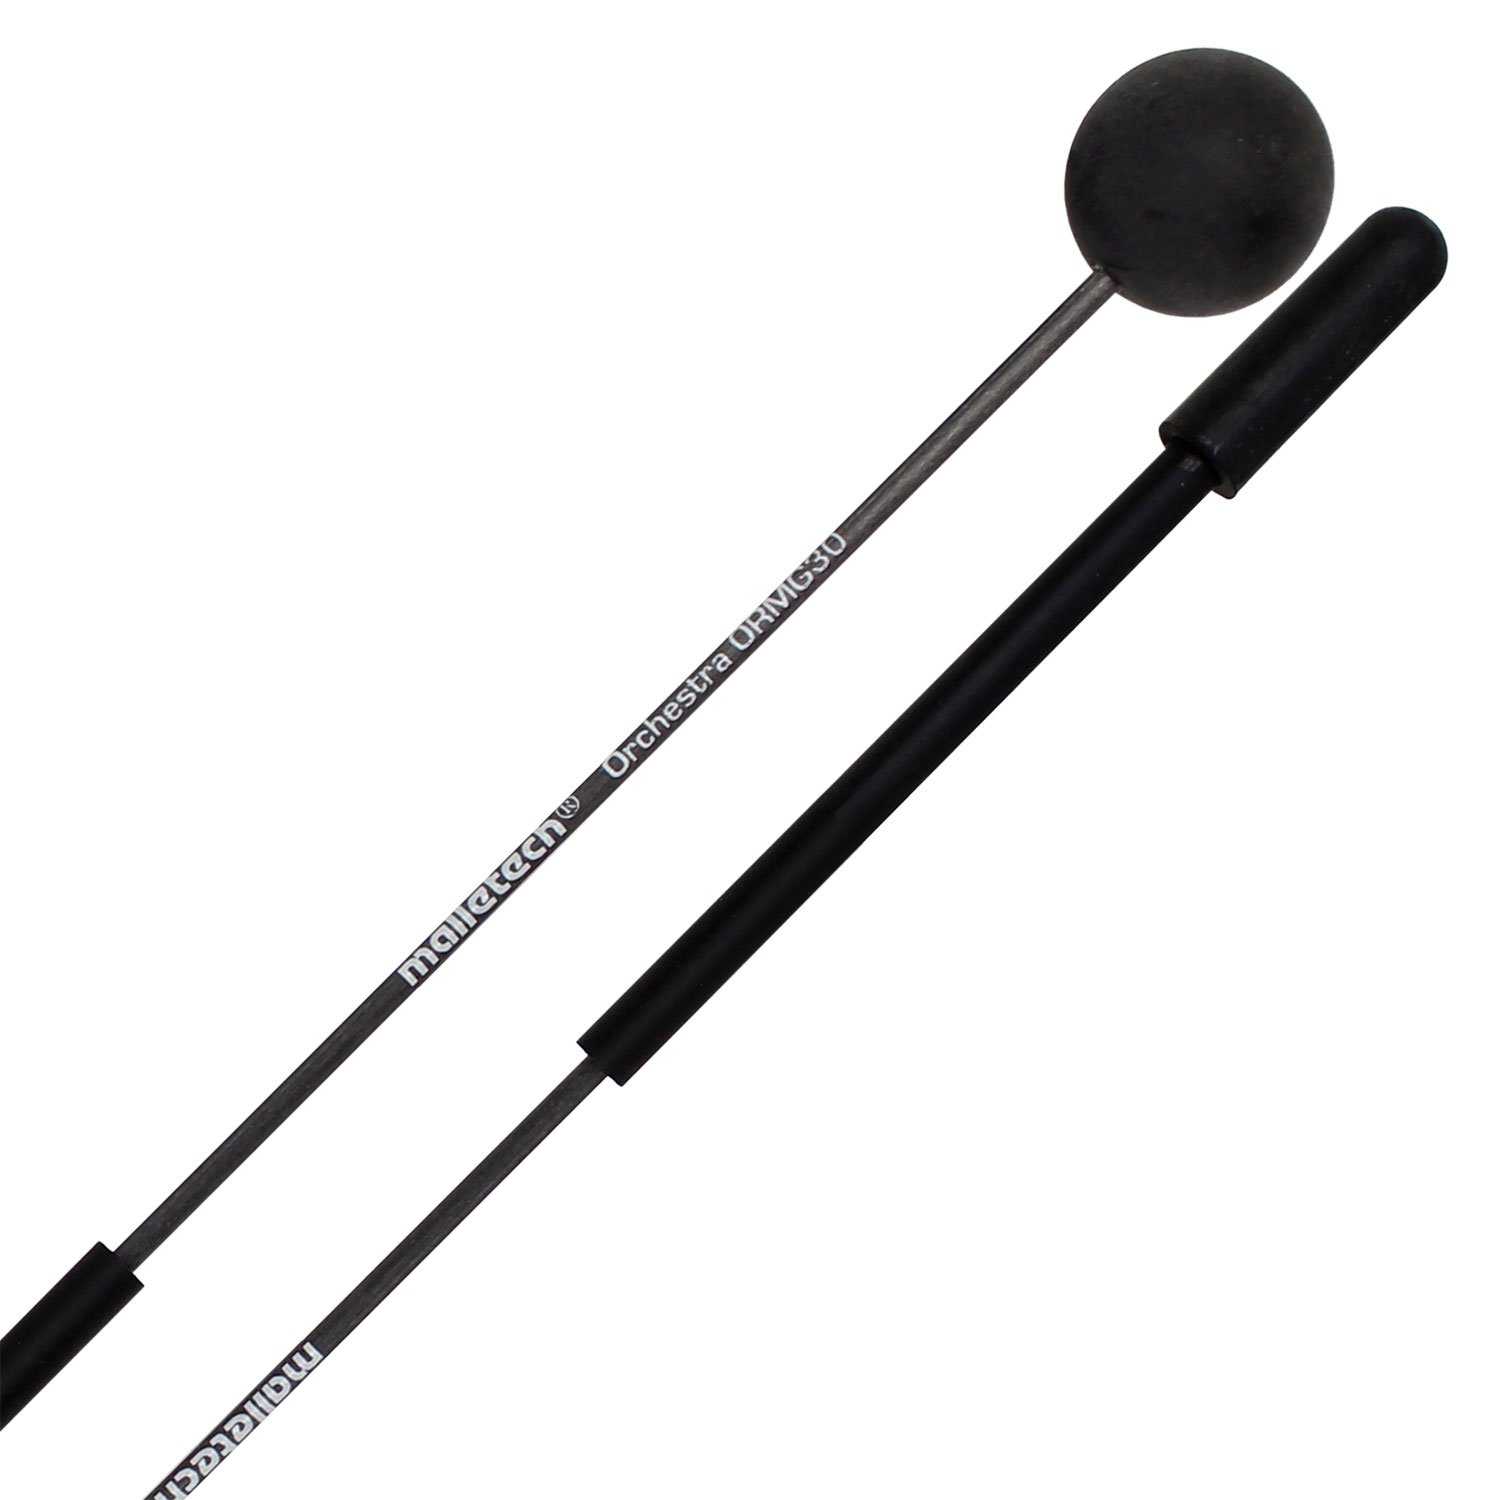 Malletech ORMG30 Orchestral Series Soapy Black Ball Bell Mallets